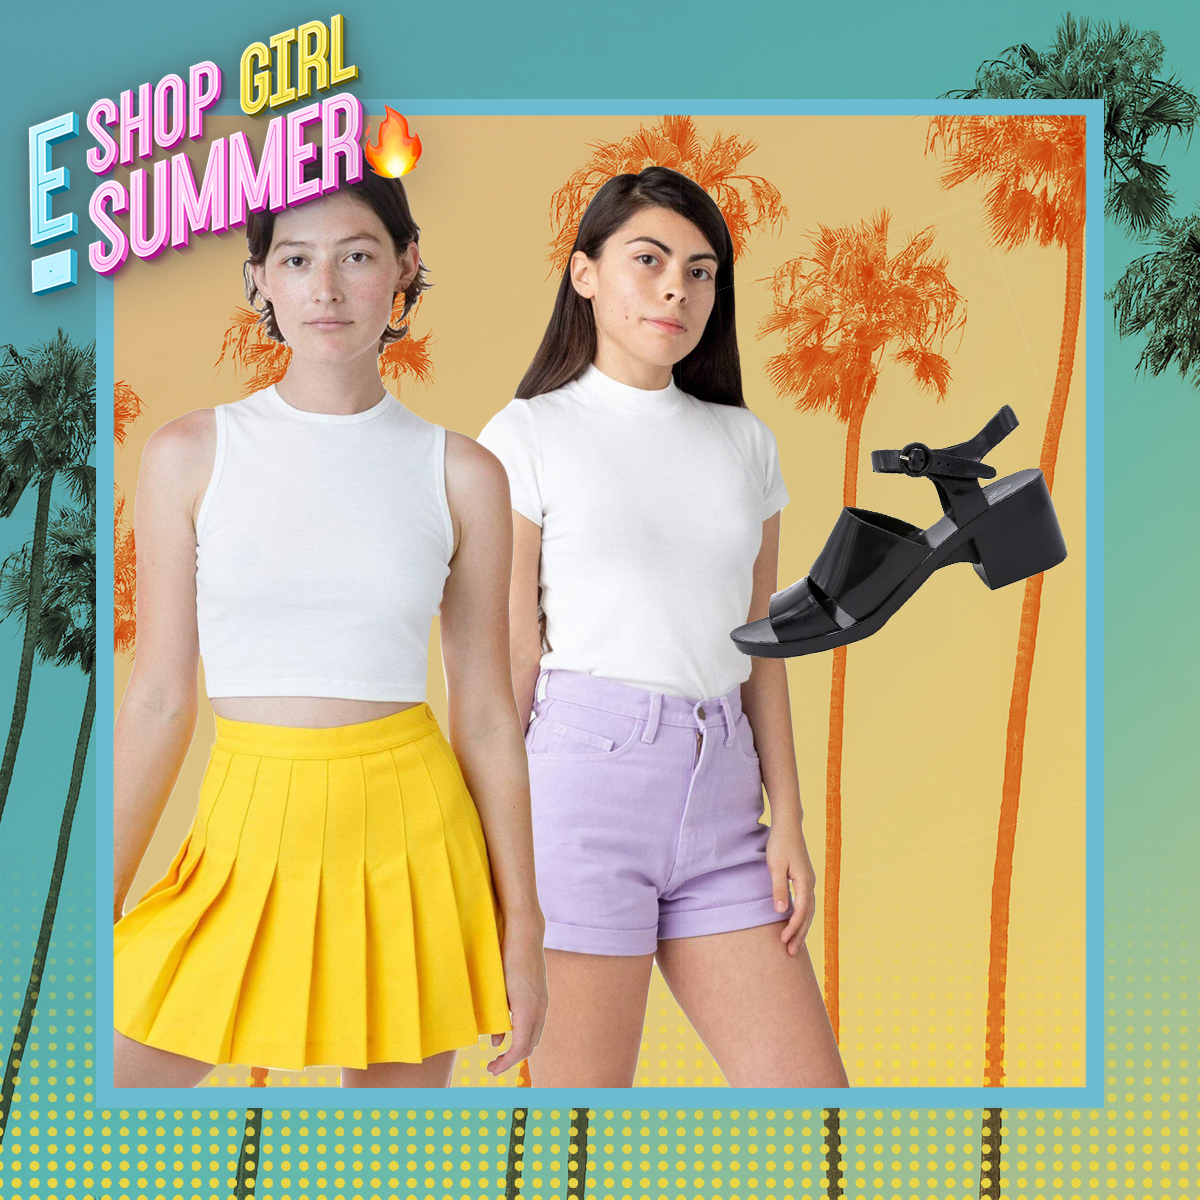 https://akns-images.eonline.com/eol_images/Entire_Site/2021626/rs_1200x1200-210726082422-1200_ecomm-Los-Angeles-Apparel-Shop-Girl-Summer.jpg?fit=around%7C1200:1200&output-quality=90&crop=1200:1200;center,top